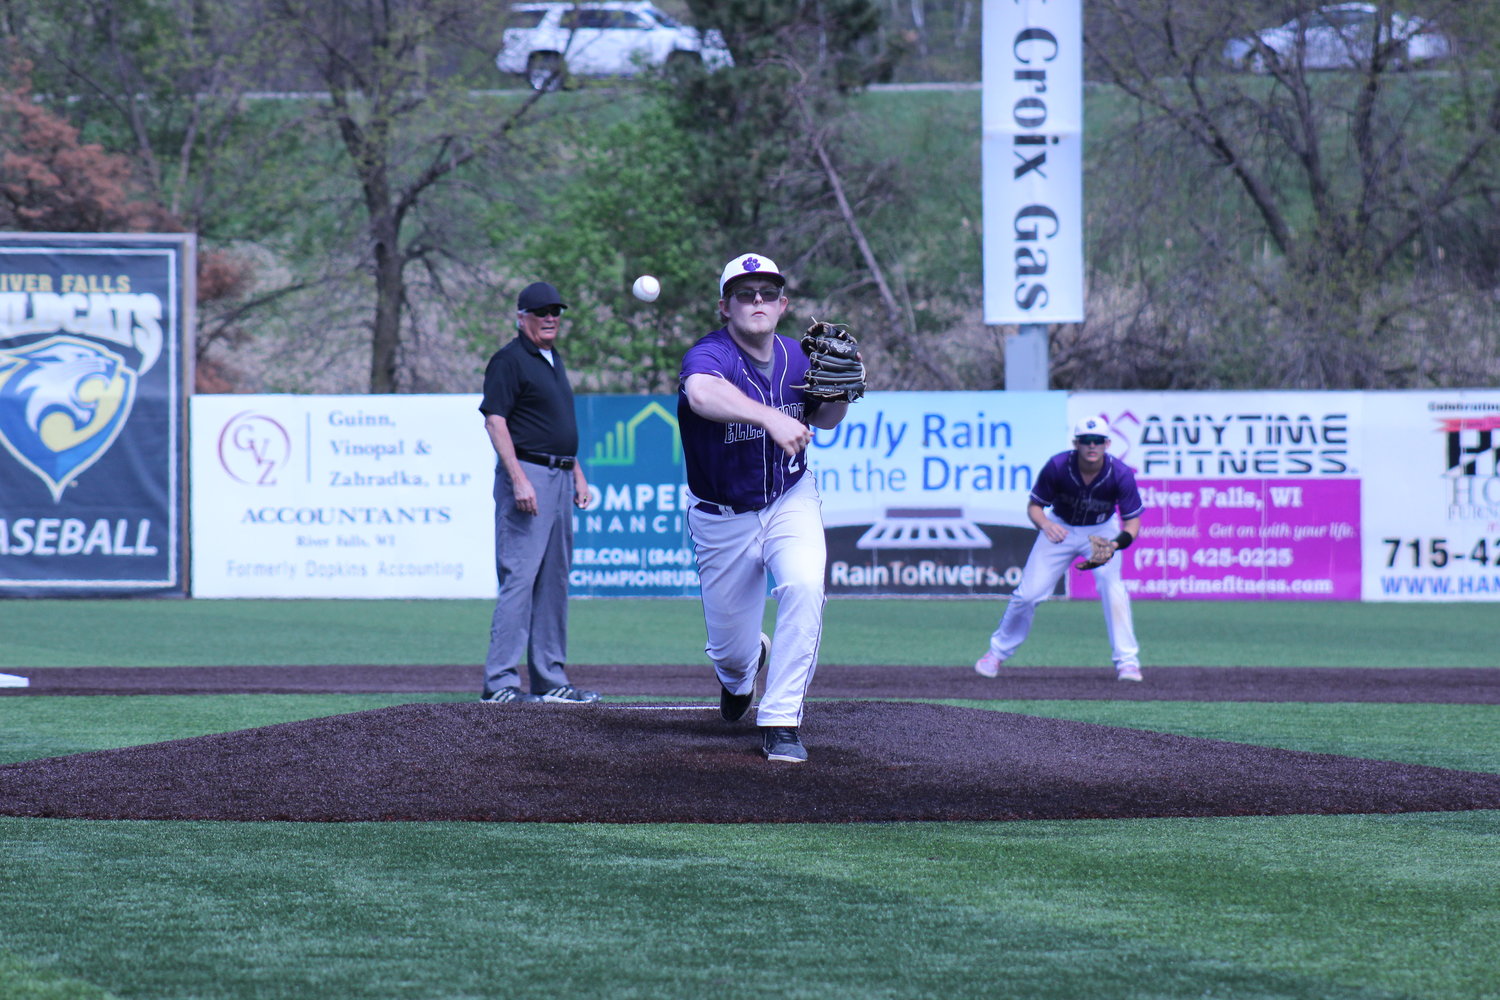 Then-senior Hunter Herum of the Ellsworth baseball team pitches during a game last season. Herum was a versatile utility player that filled many roles for the Panthers. He’s one of seven seniors that graduated last year and will need to be replaced before opening day.